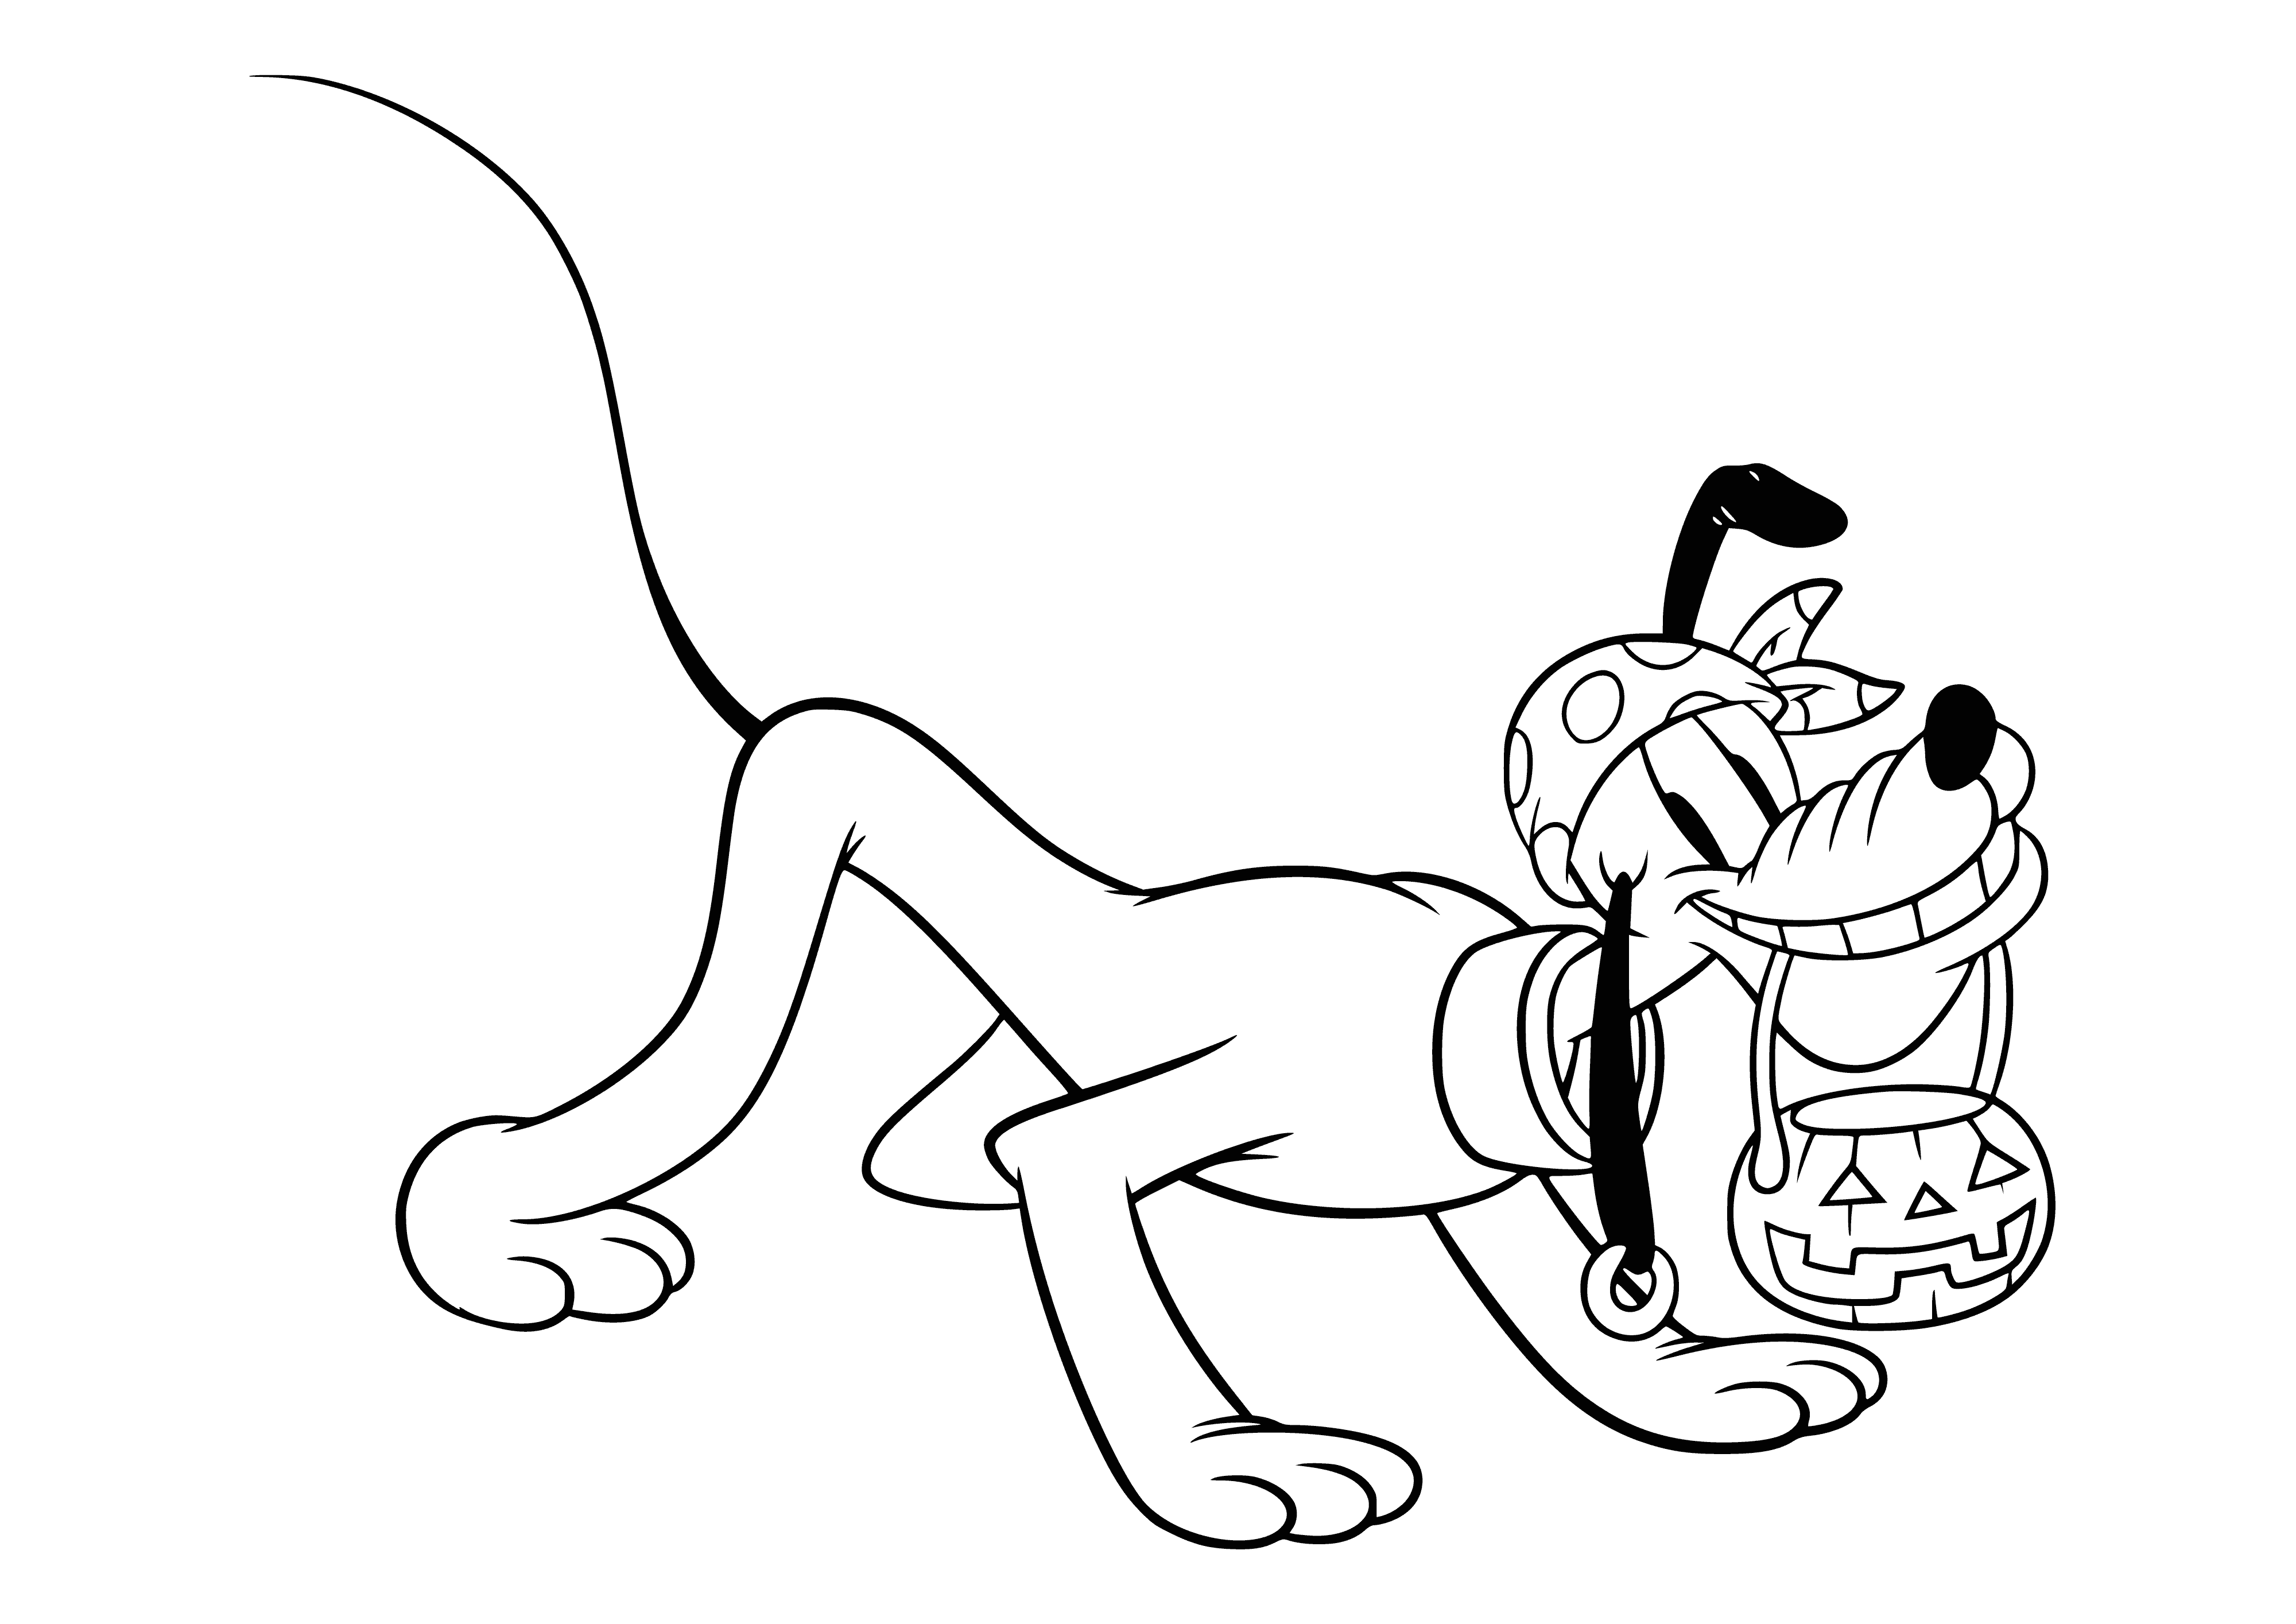 Goofy dog on Halloween coloring page